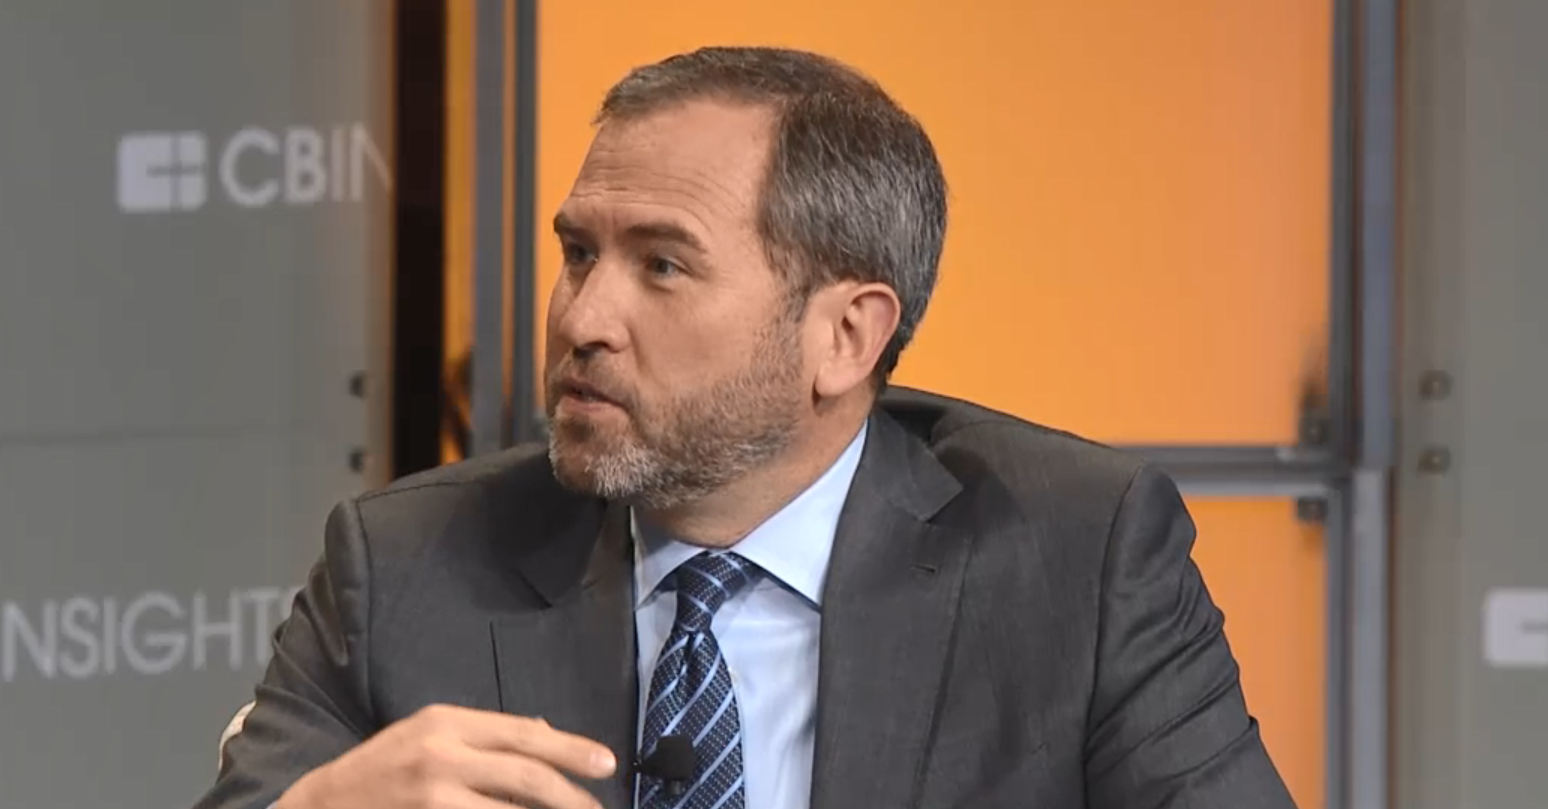 Ripple CEO Garlinghouse Intends To ‘Press Our Advantage’ With New Investments